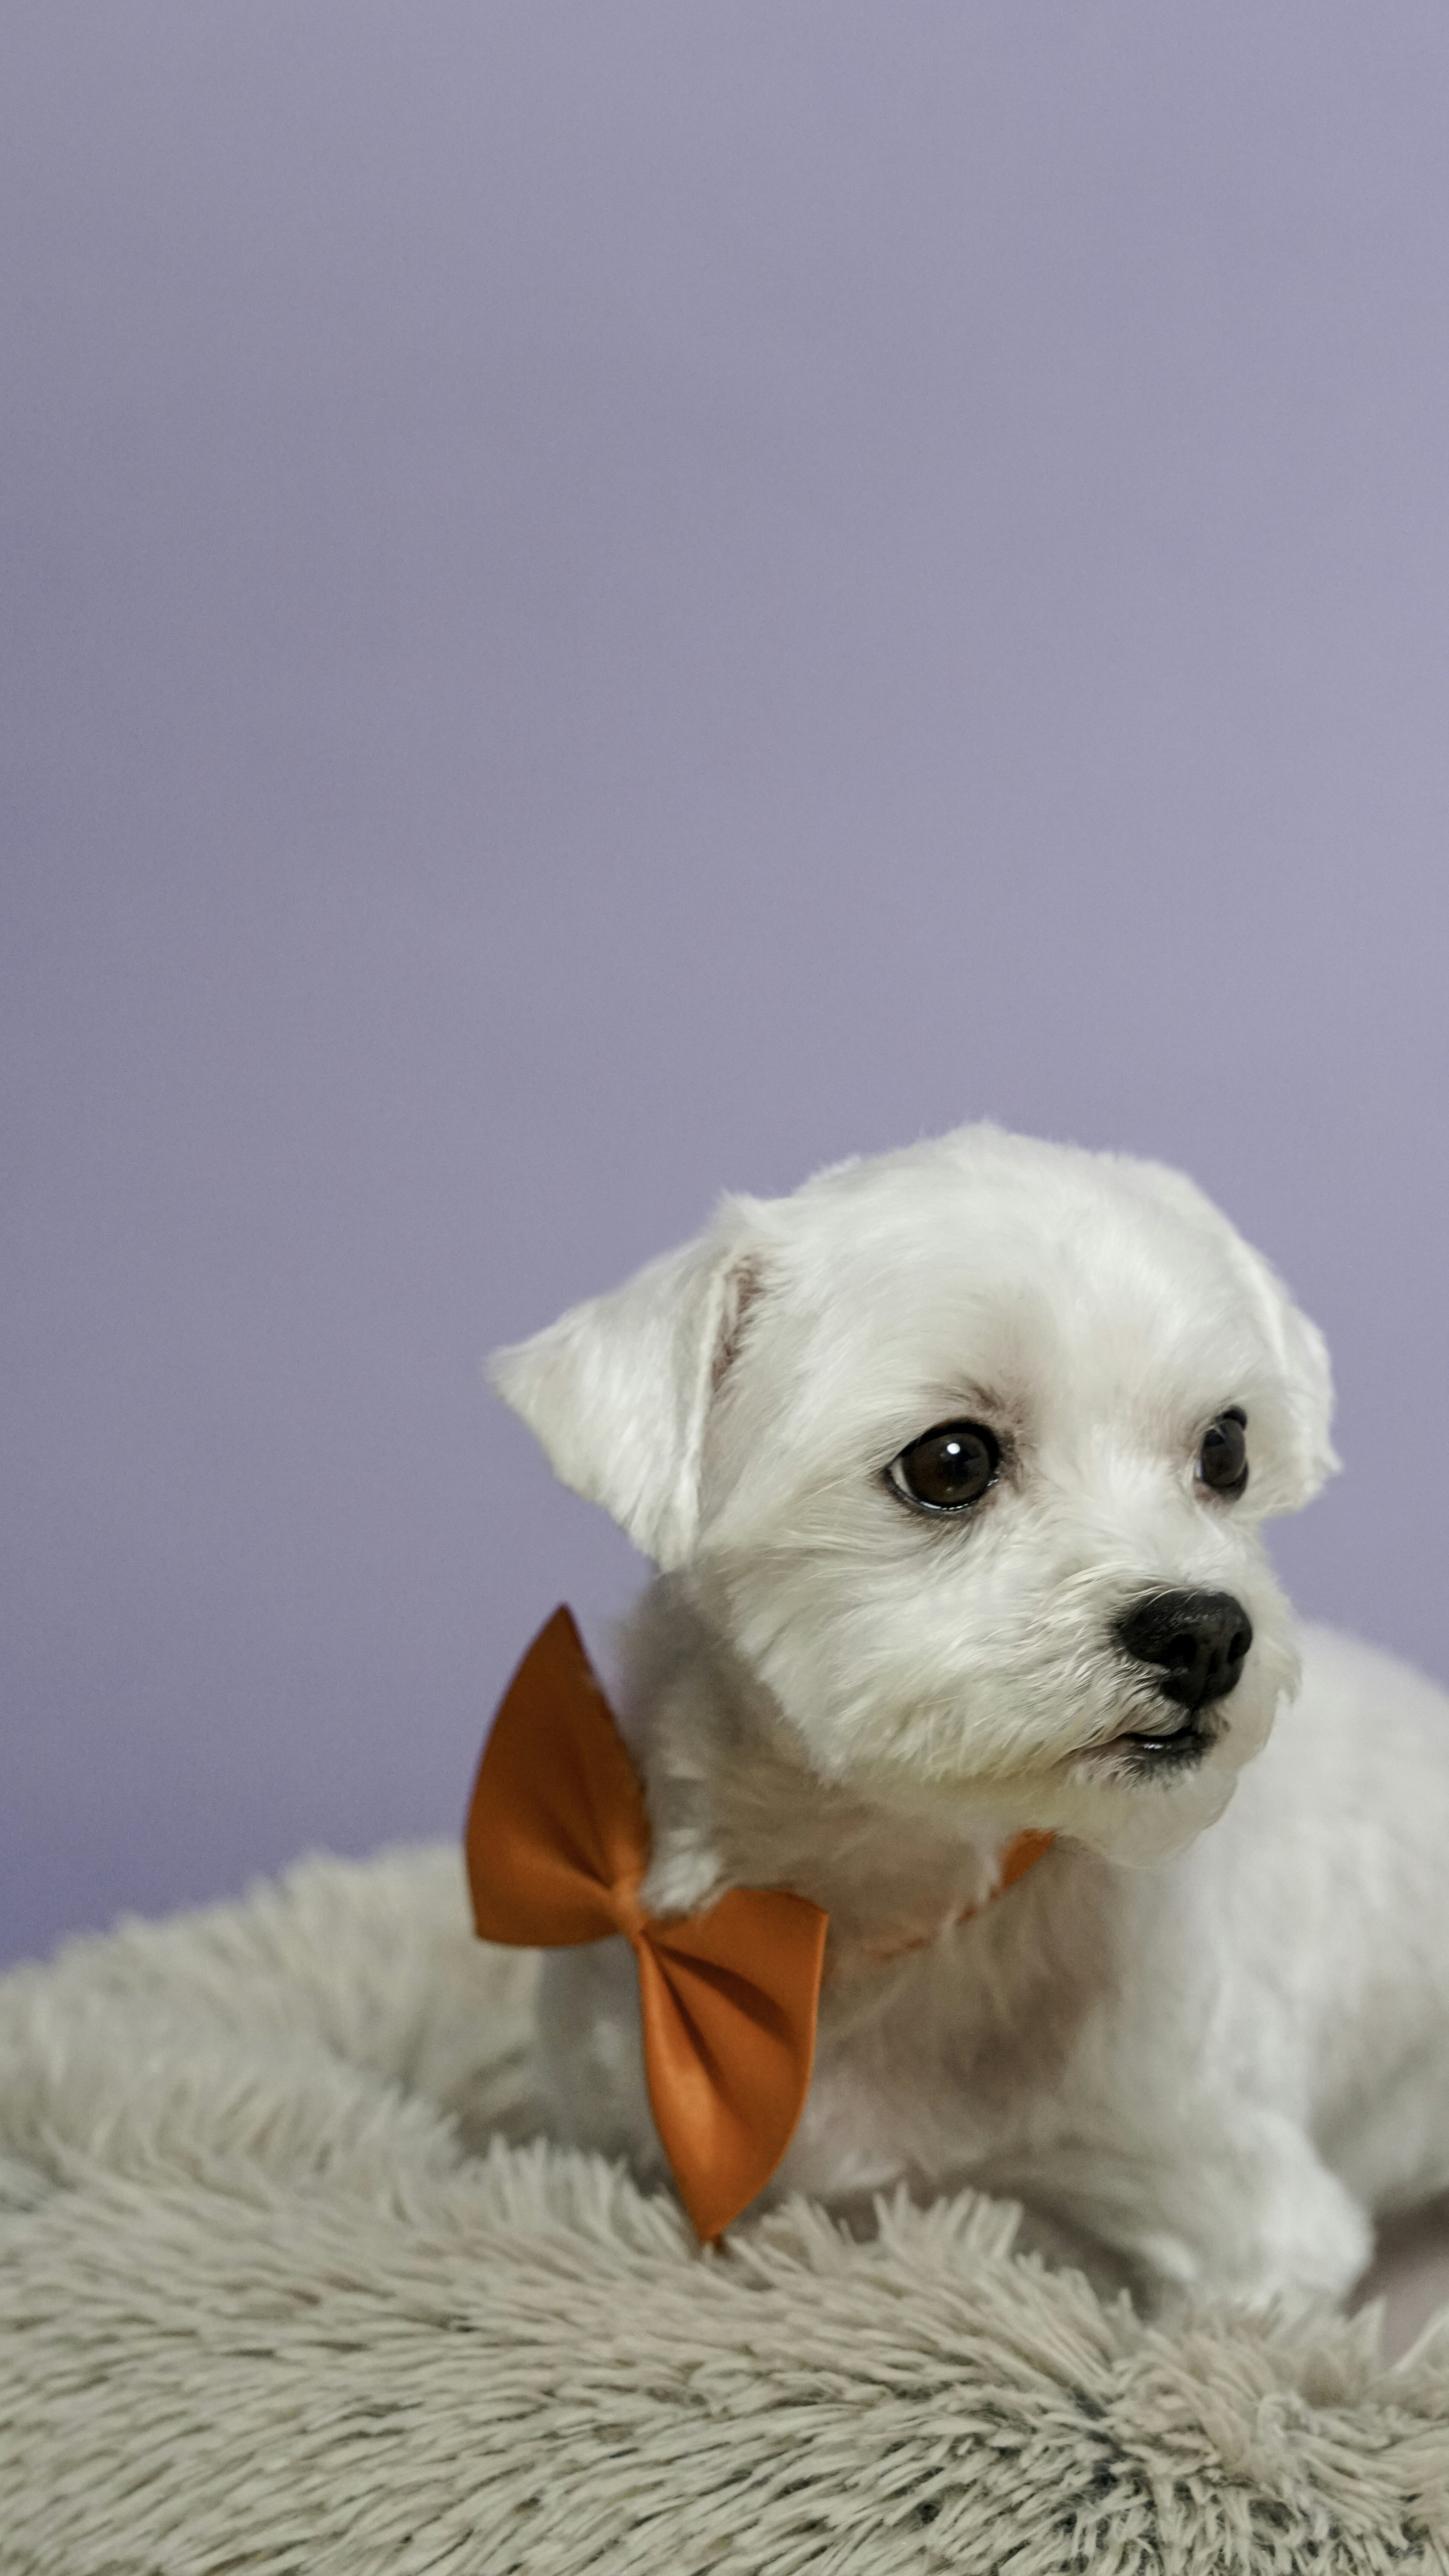 5 Facts About the Maltese Dog We Guarantee You'll Love